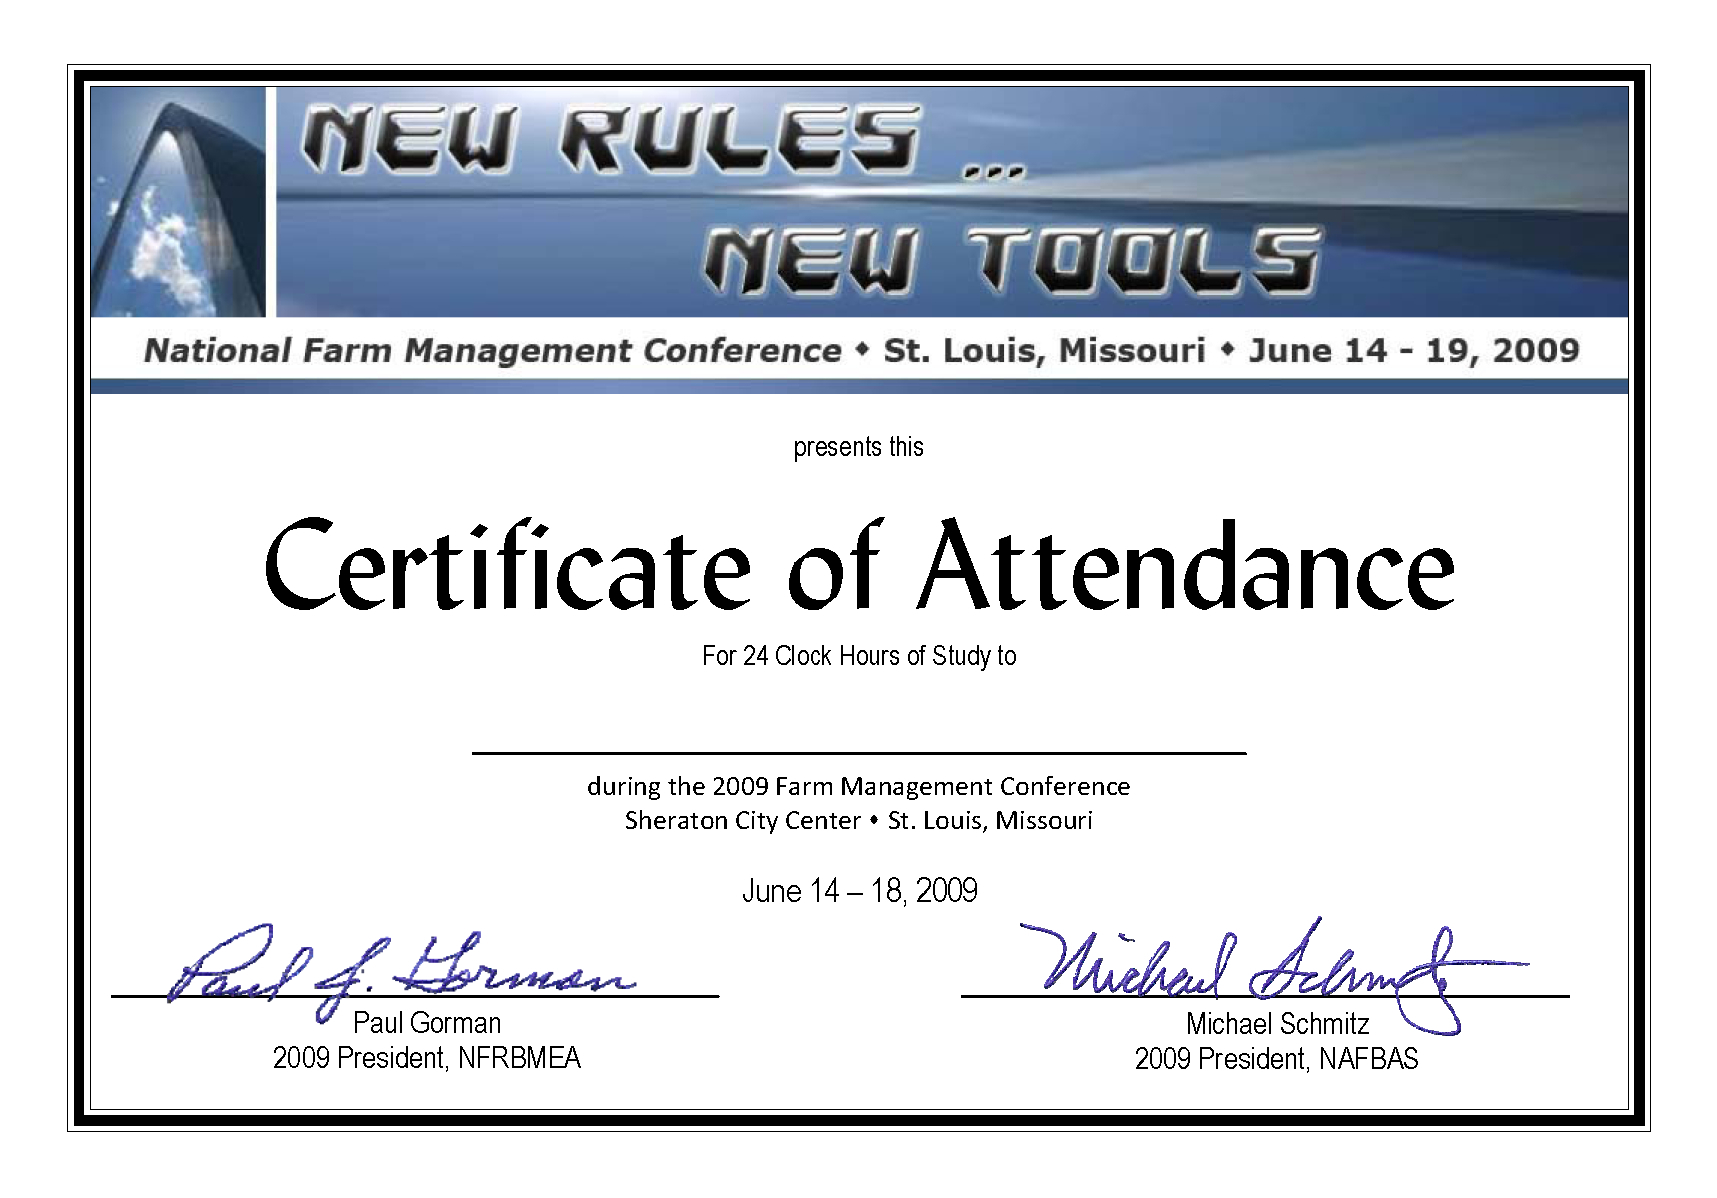 Conference Certificate Of Attendance Template - Great Within Conference Certificate Of Attendance Template